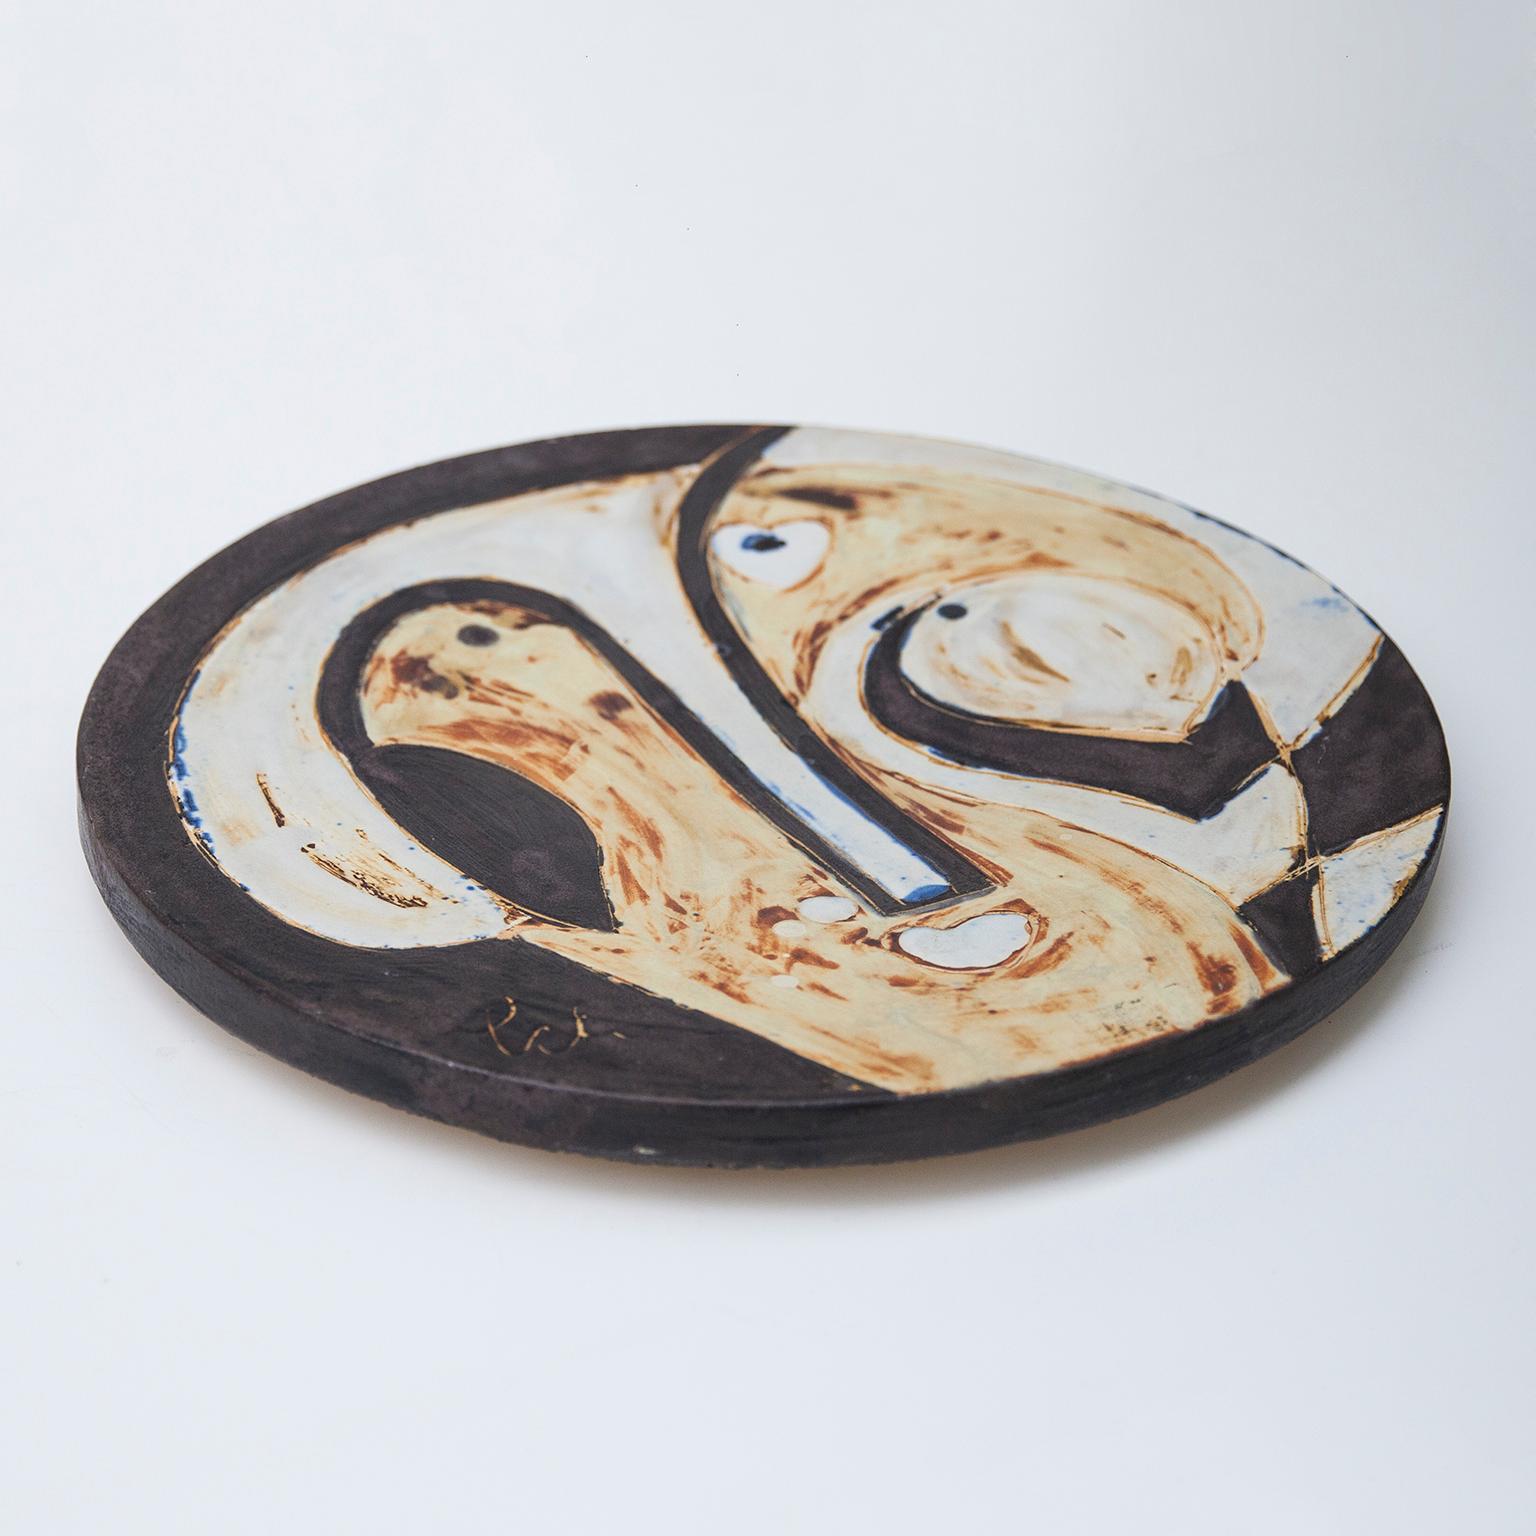 Unique wall art decoration or fruit plate by his famous German art pottery artist Helmut Schäffenacker.

Helmut Schäffenacker German art pottery / studio ceramic wall decoration, wonderful object in deep colors in the style of Picasso and a unique